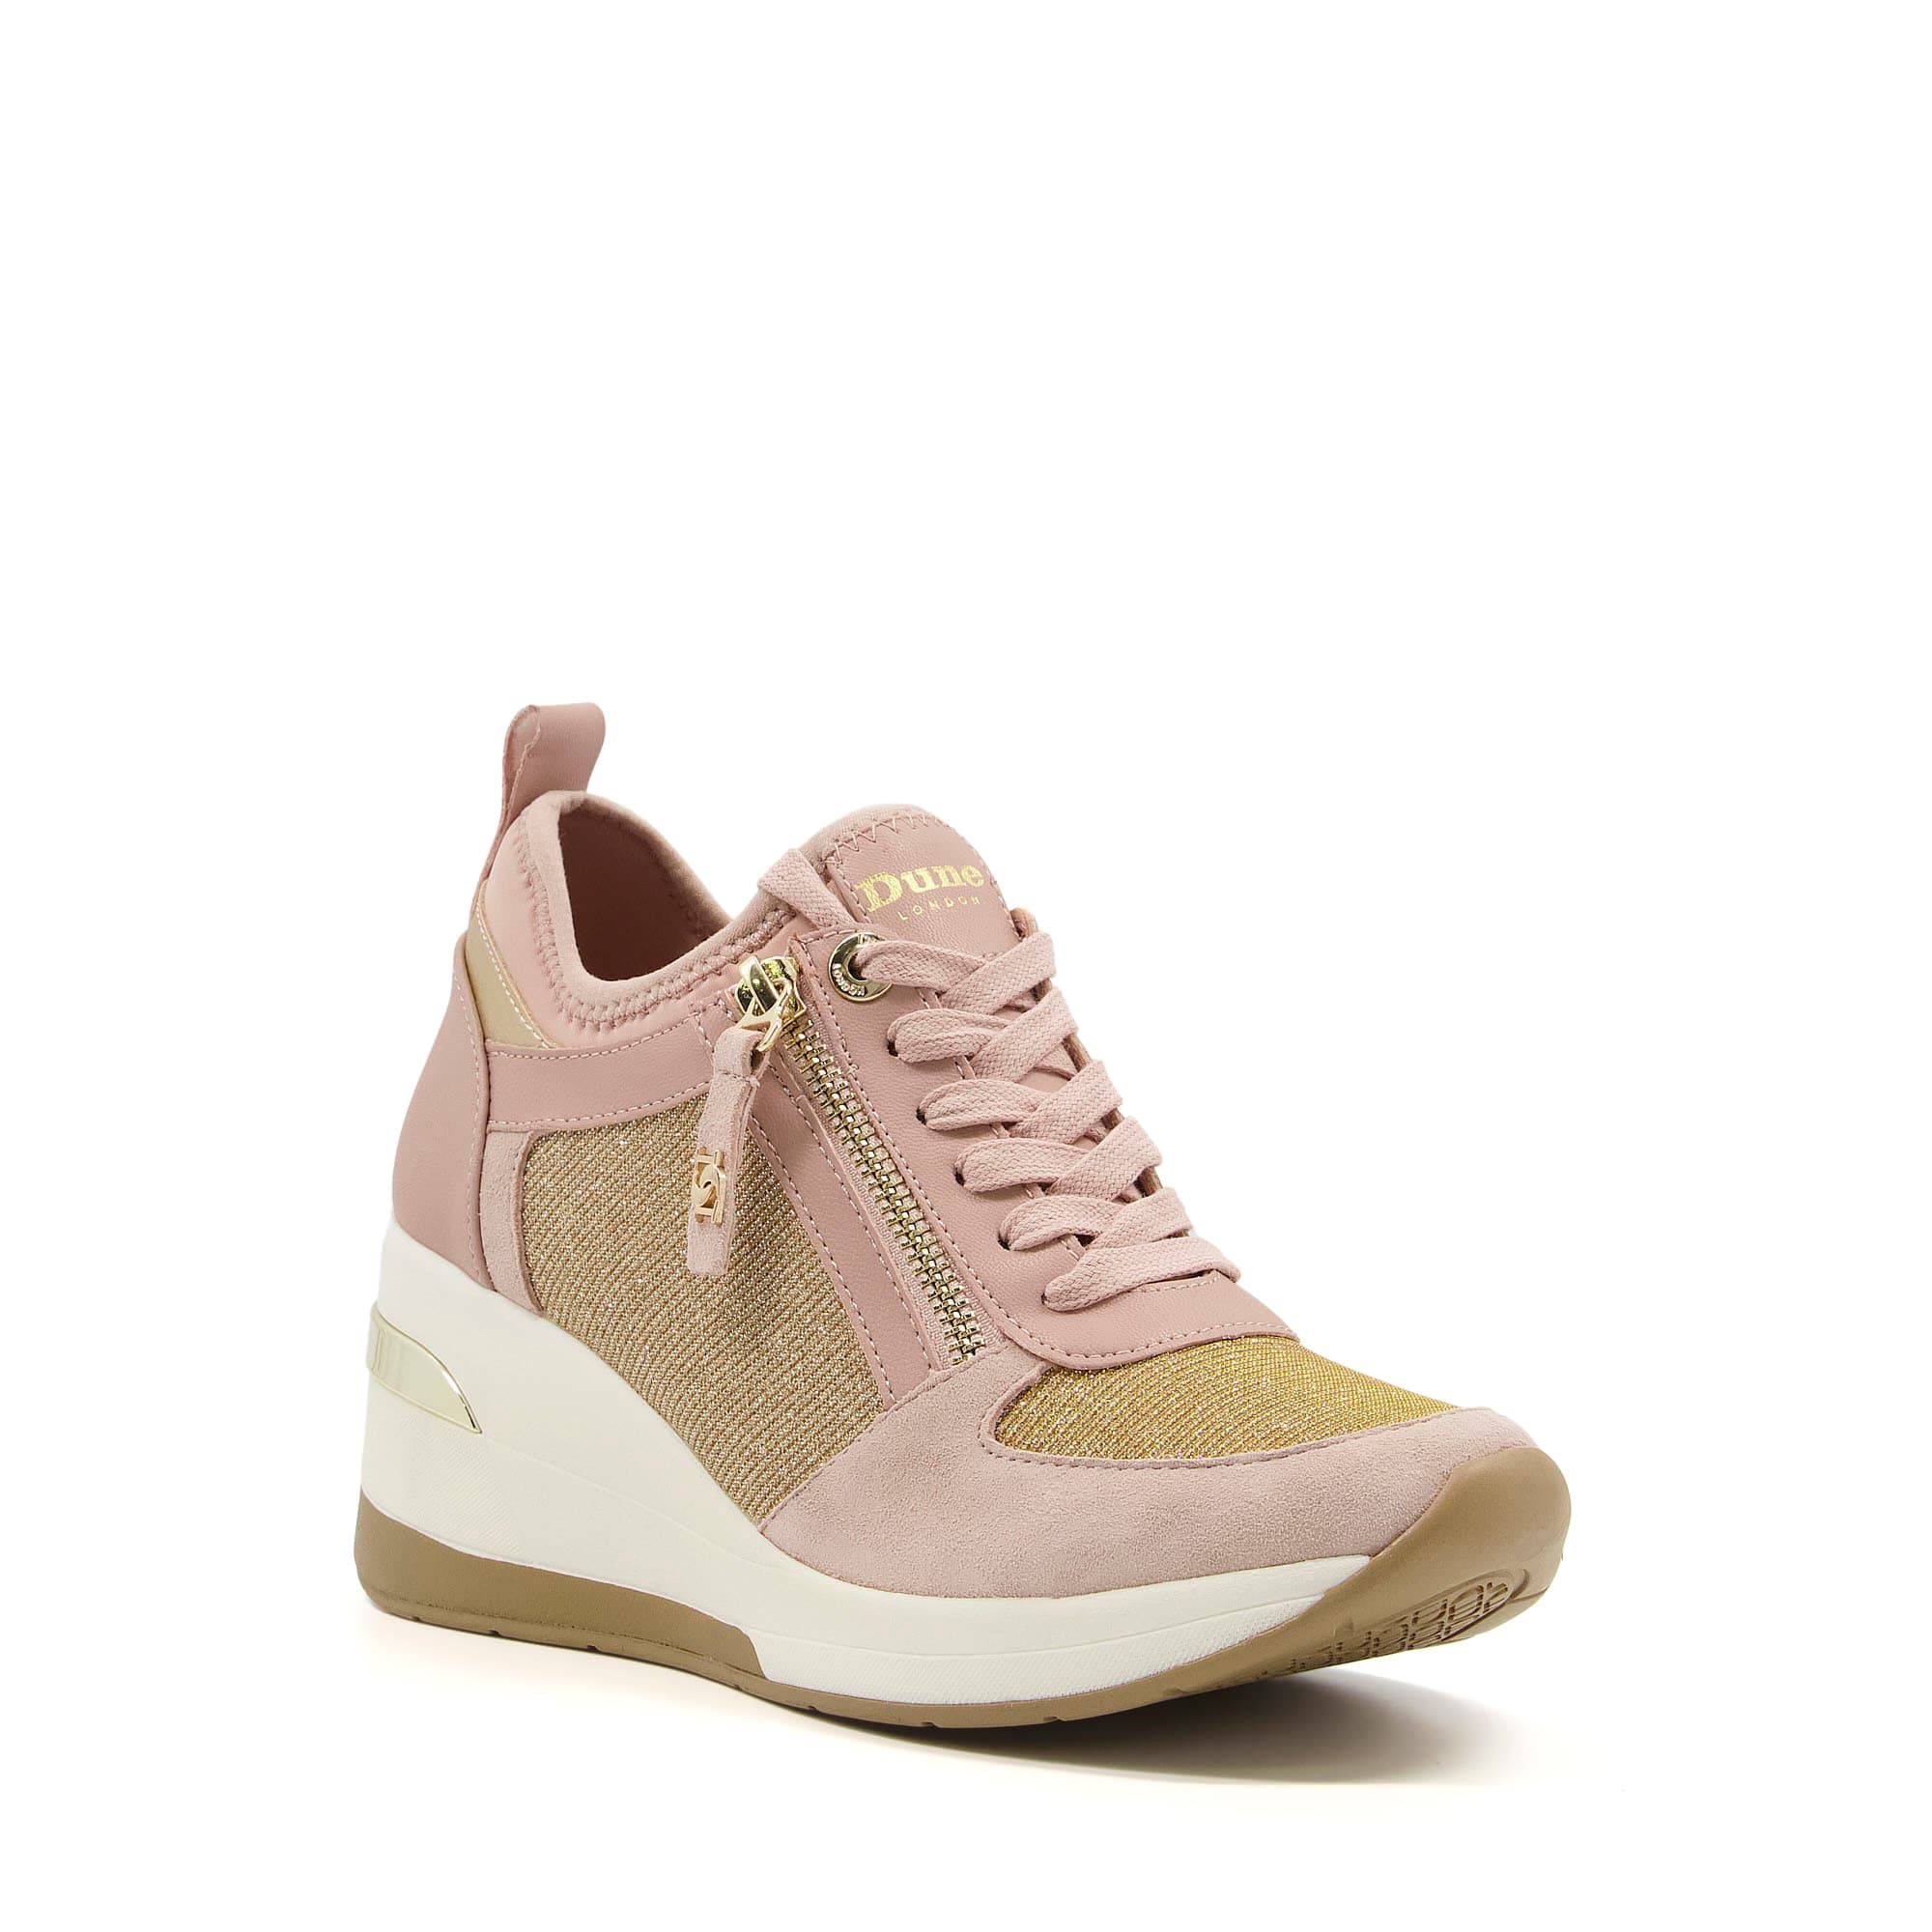 Elongate your legs and elevate your style with these wedge trainers. This lace-up style has zip detailing down the front for a modern, sporty look. Made from a combination of soft textured fabrics they are light-weight and the soft wedge sole adds ex